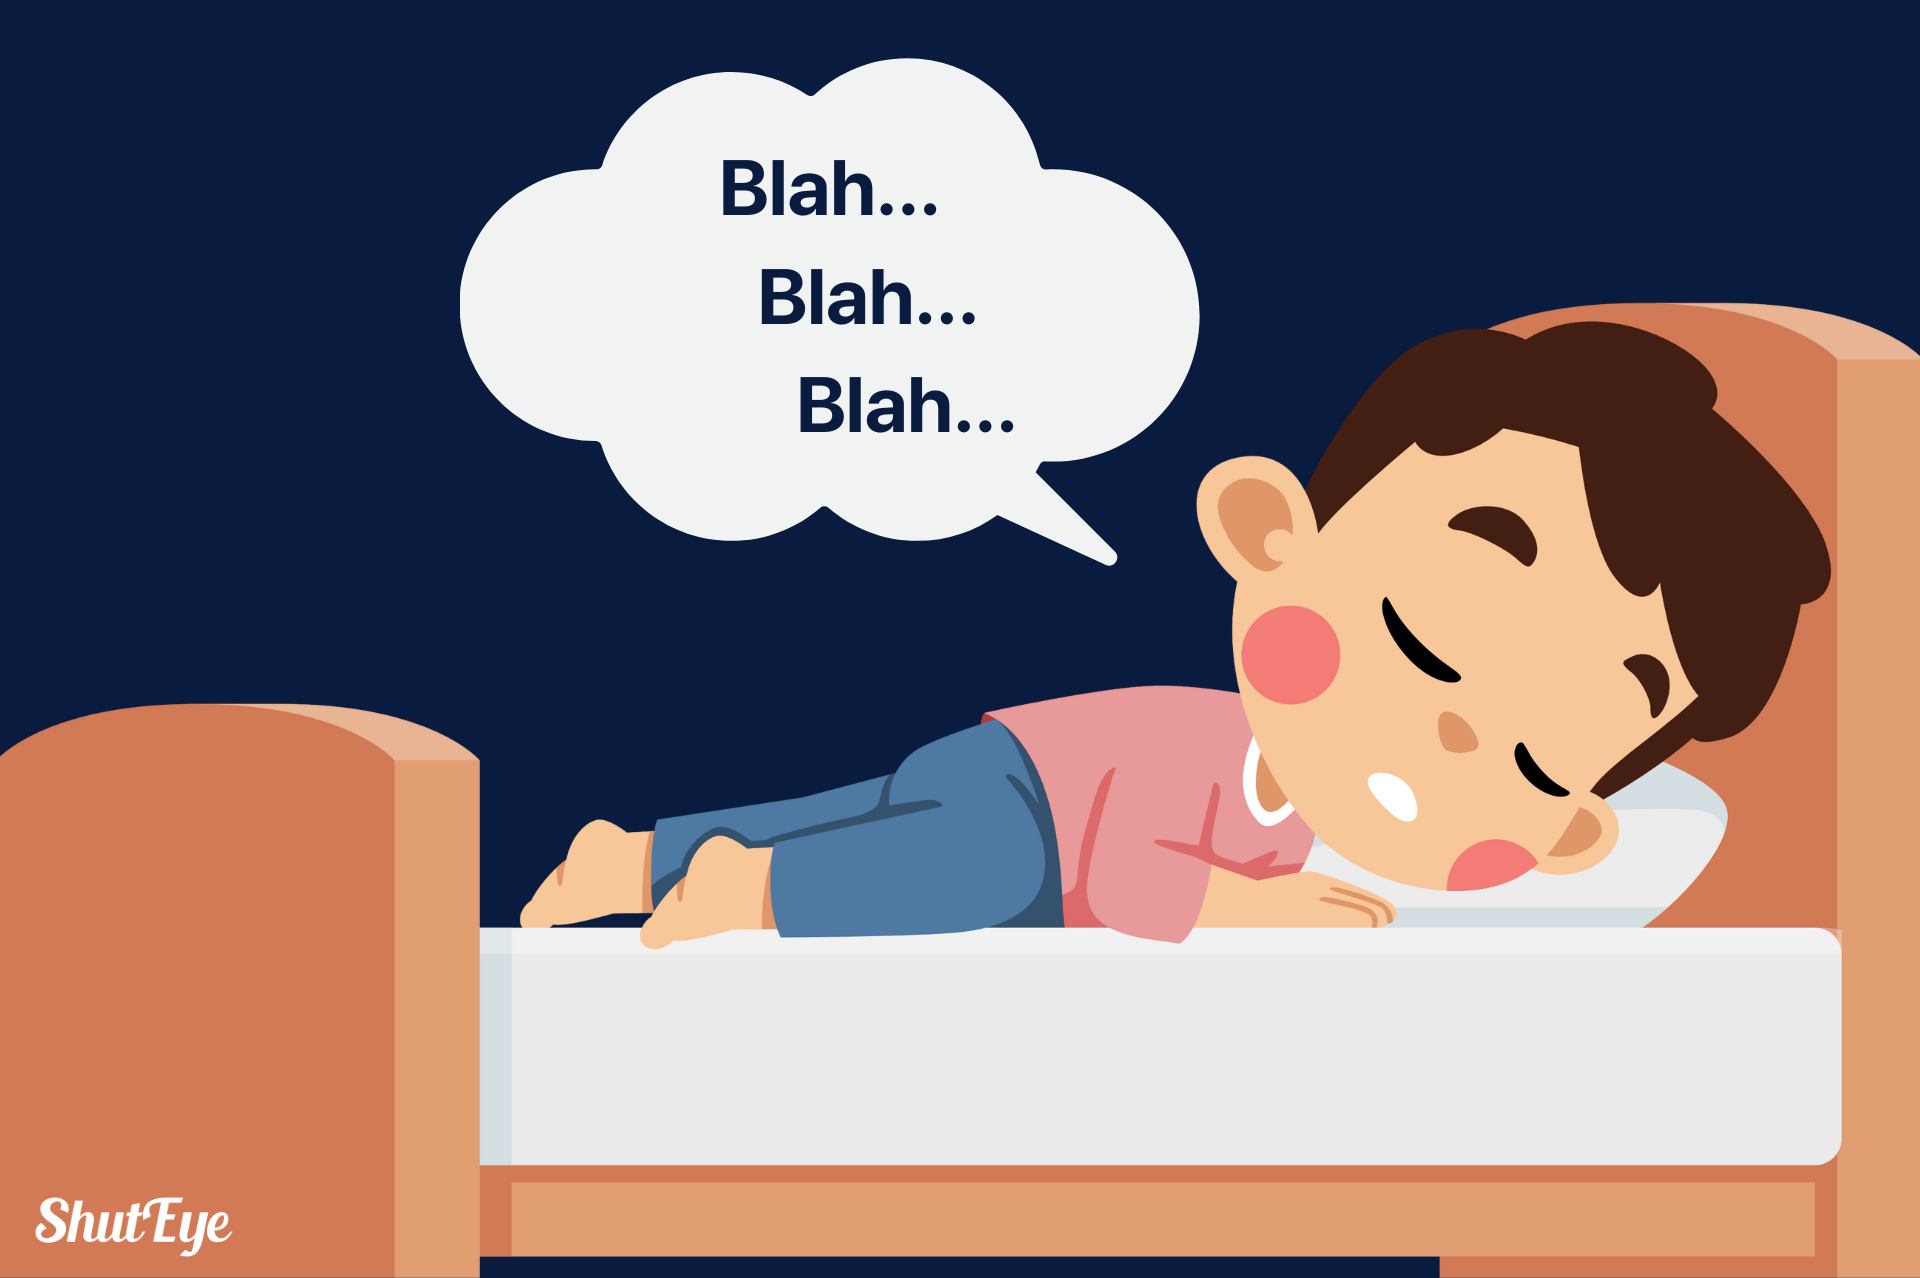 Stop Sleep Talking Now: Causes and How to Sleep Talk Less